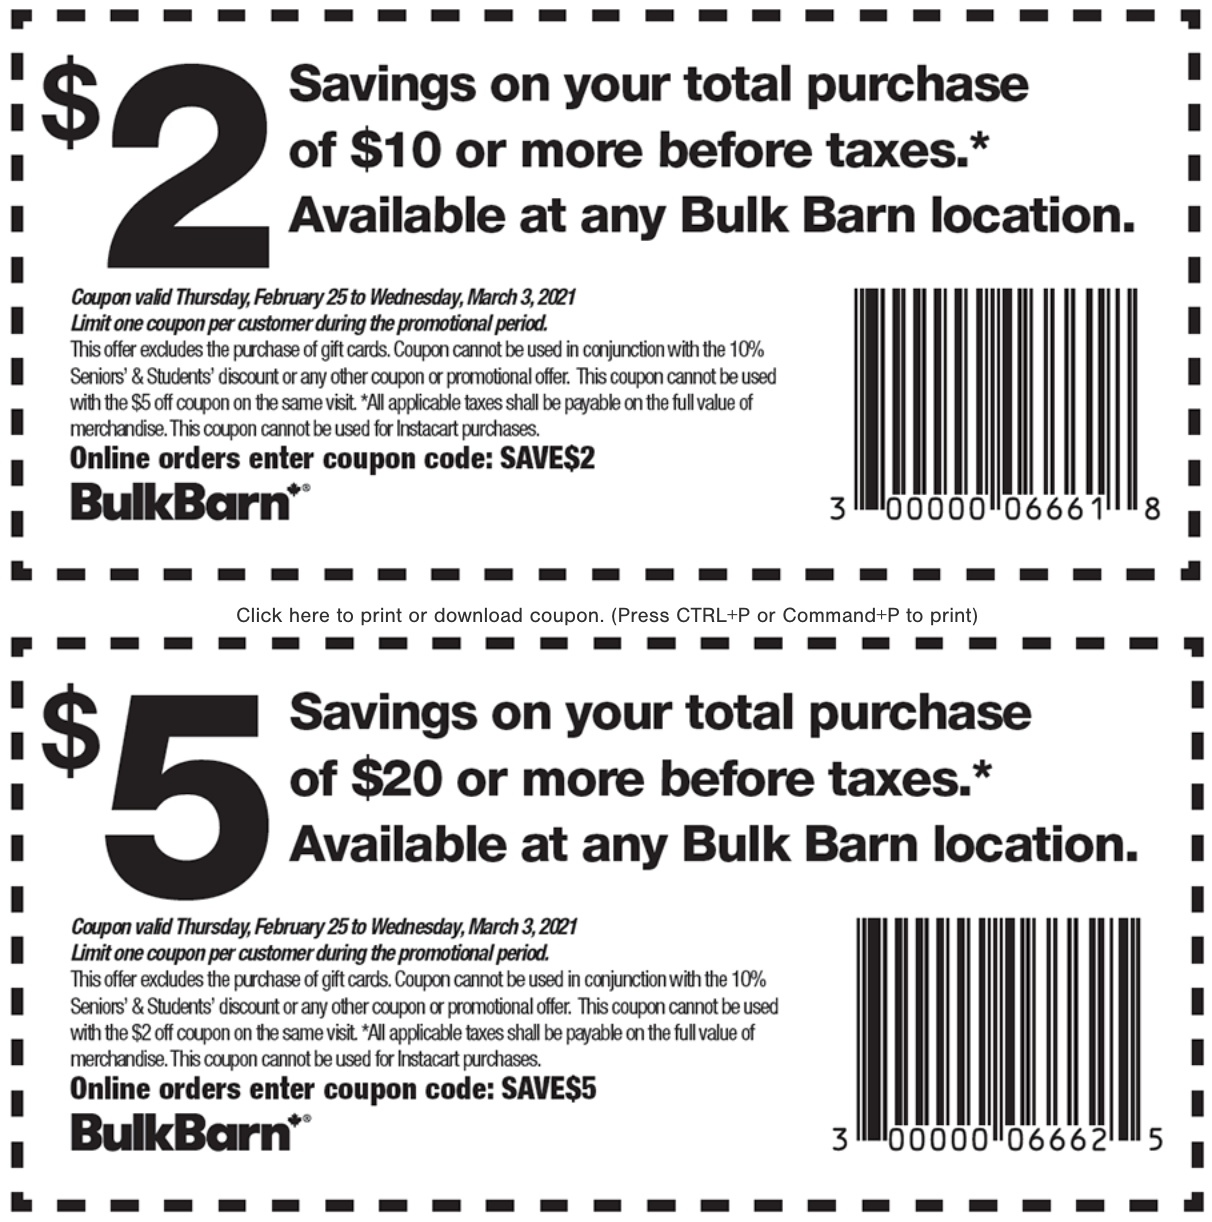 Bulk Barn Canada Coupons And Flyer Deals Save 2 To 5 Off Your